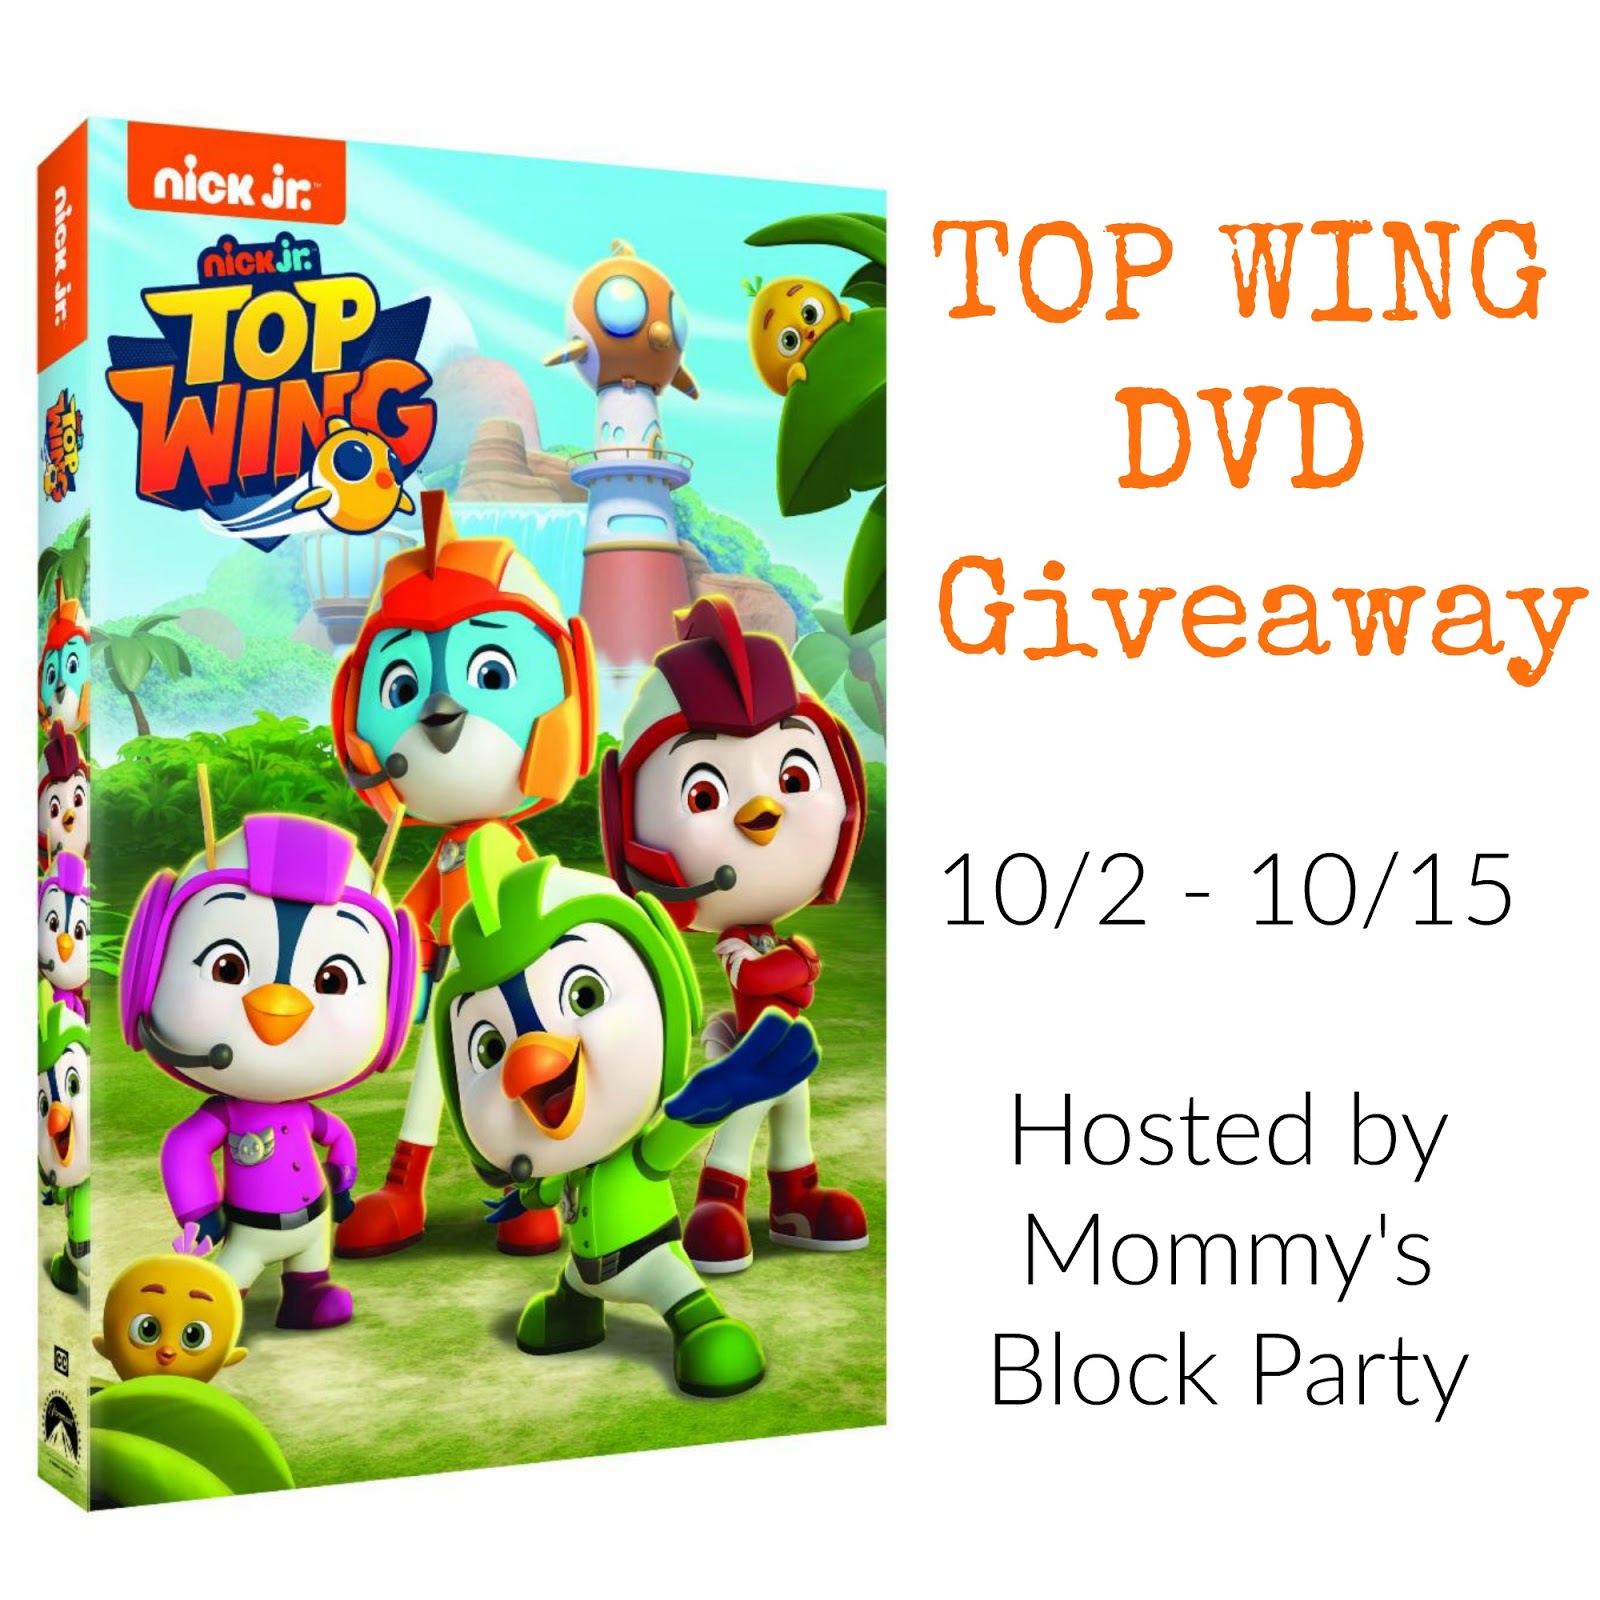 Nick Jr.'s TOP WING Now Available on DVD - Jinxy Kids